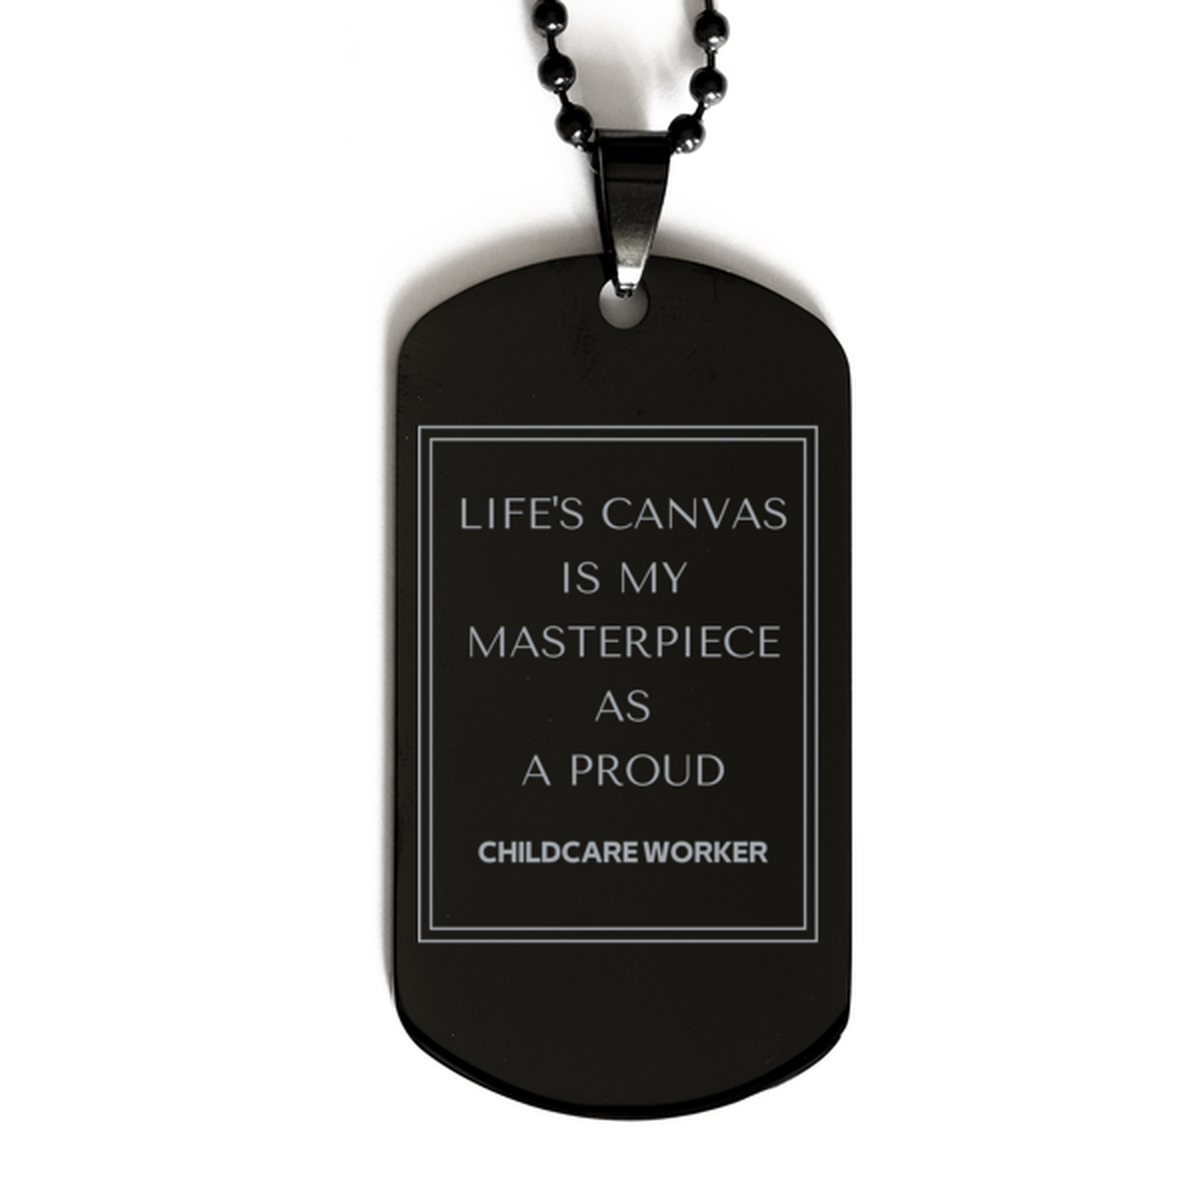 Proud Childcare Worker Gifts, Life's canvas is my masterpiece, Epic Birthday Christmas Unique Black Dog Tag For Childcare Worker, Coworkers, Men, Women, Friends